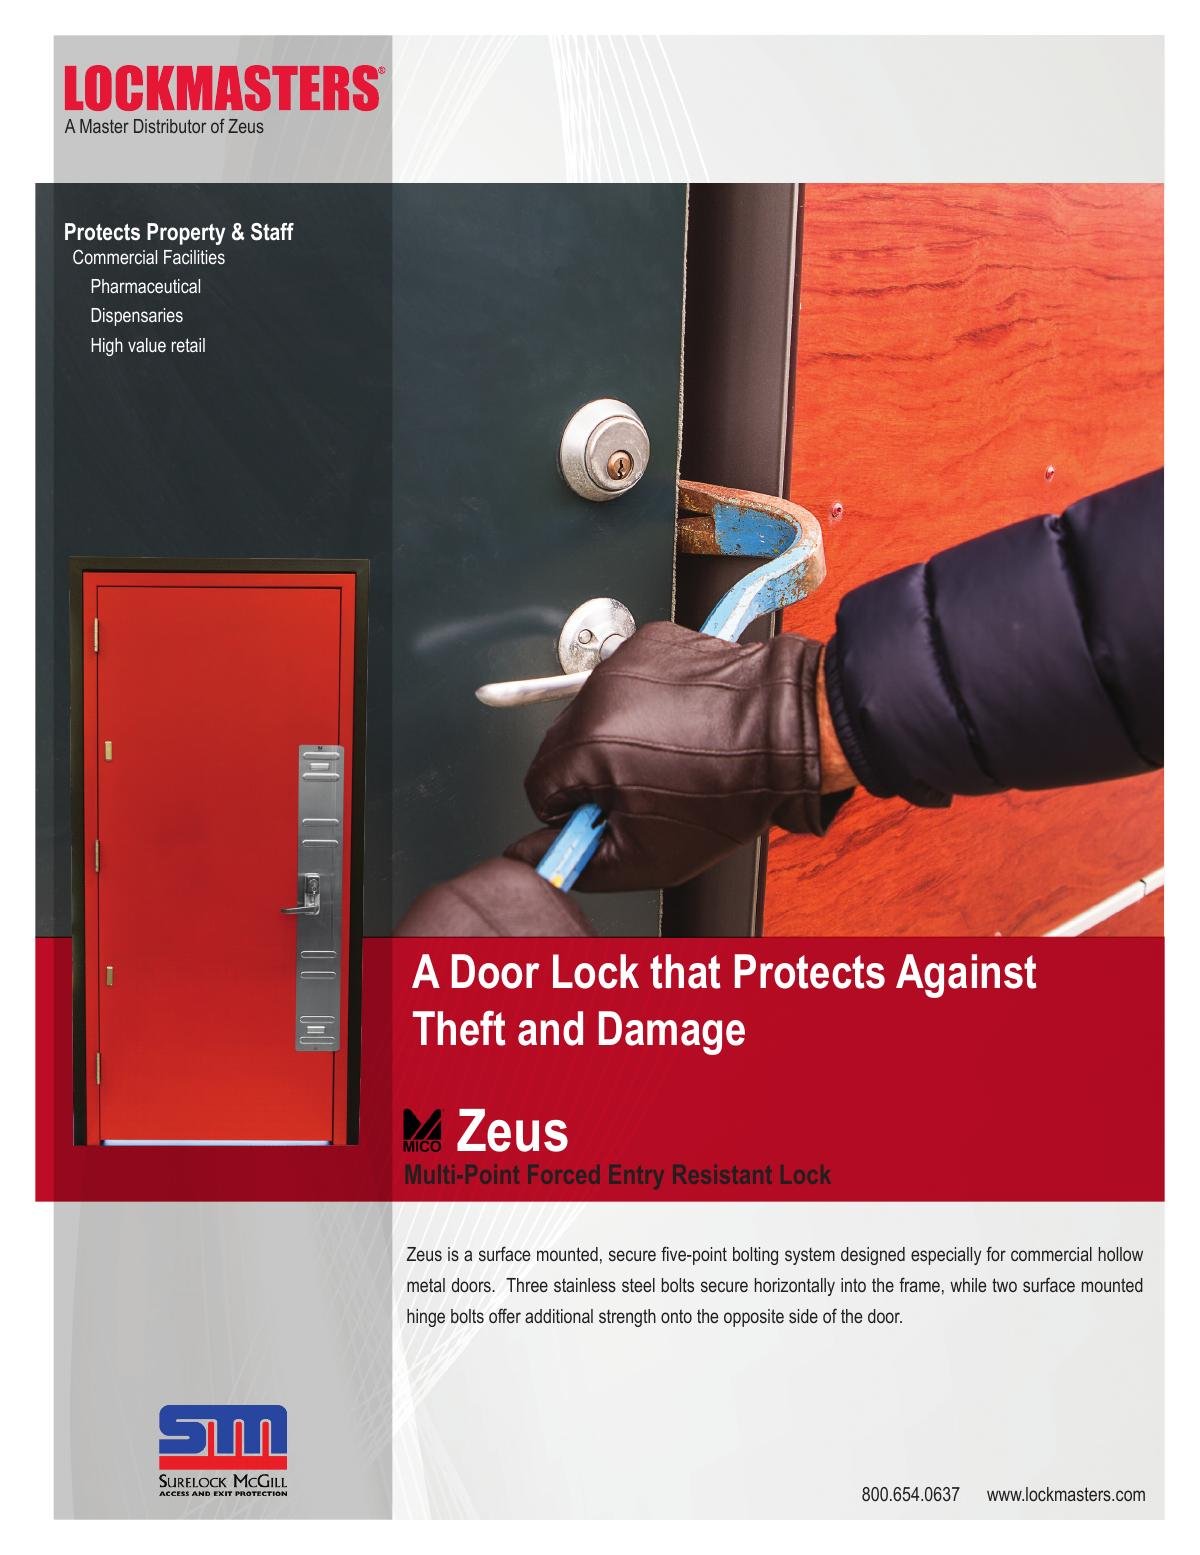 A Door Lock that Protects Against Theft and Damage